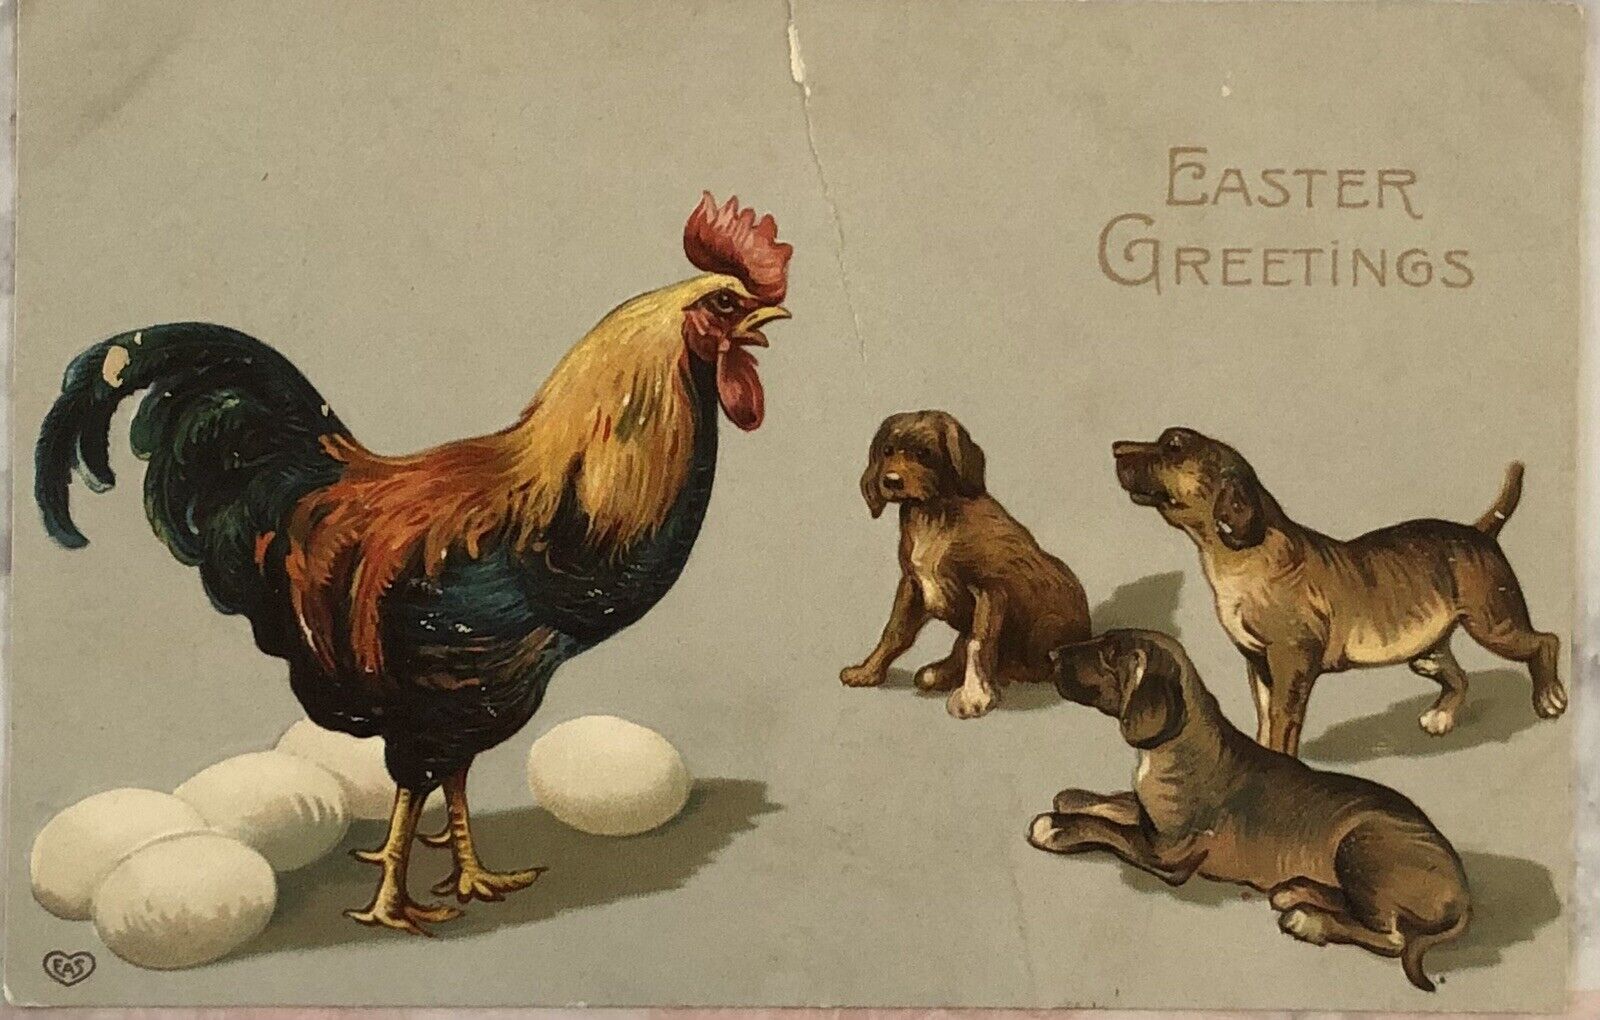 Postcard Vintage Easter Greetings  Rooster Eggs And Puppies. 1909 One Cent Stamp